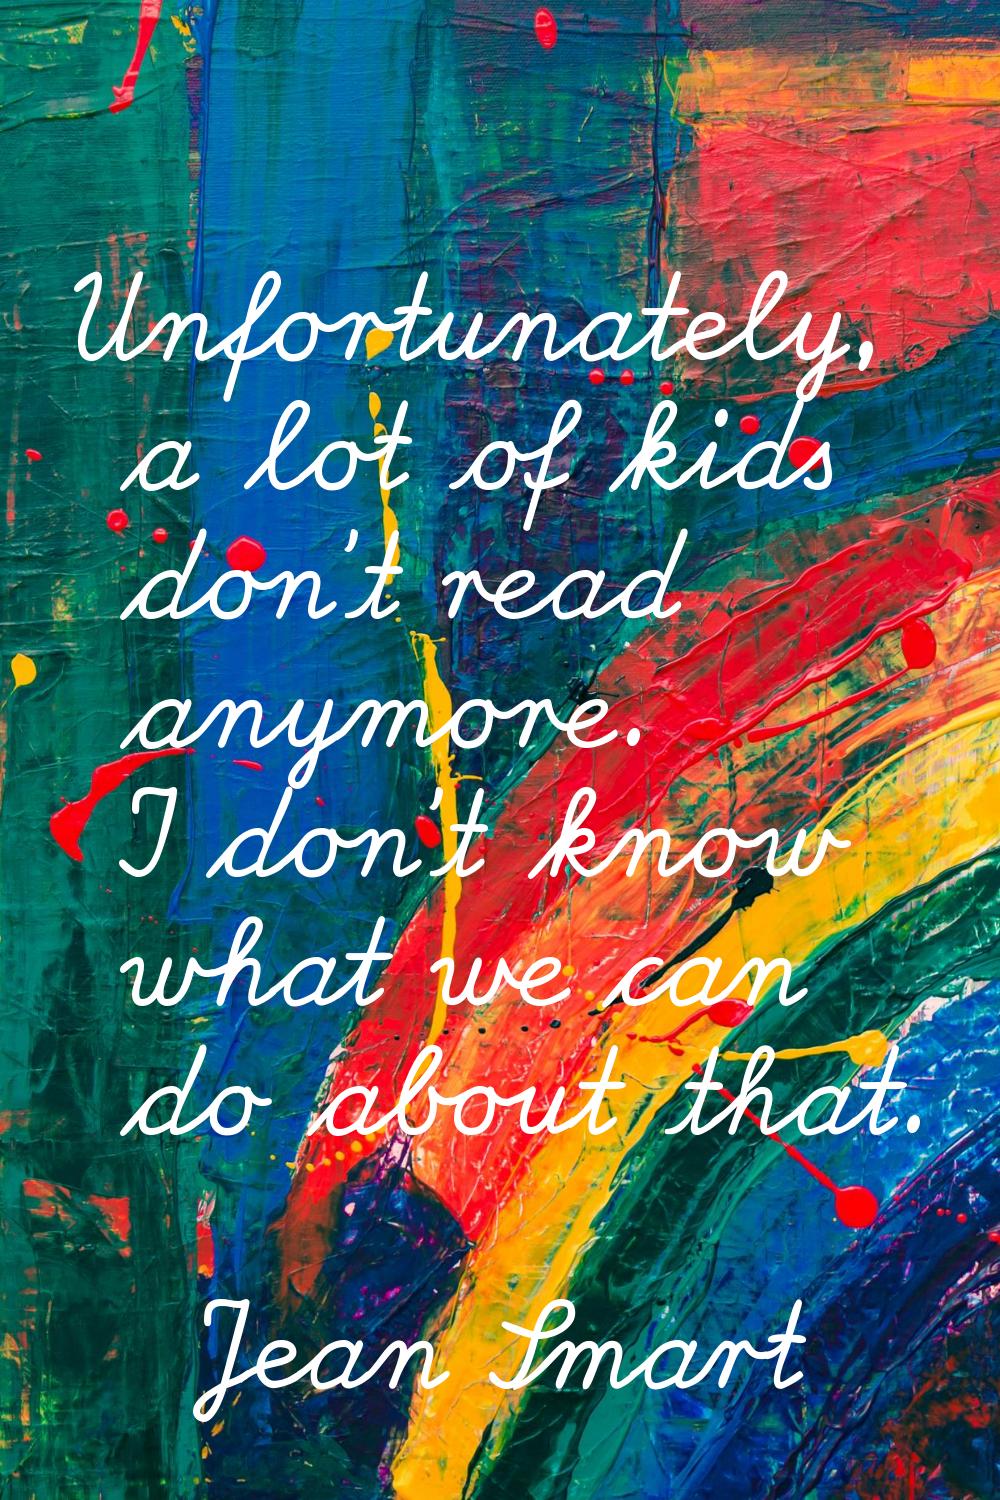 Unfortunately, a lot of kids don't read anymore. I don't know what we can do about that.